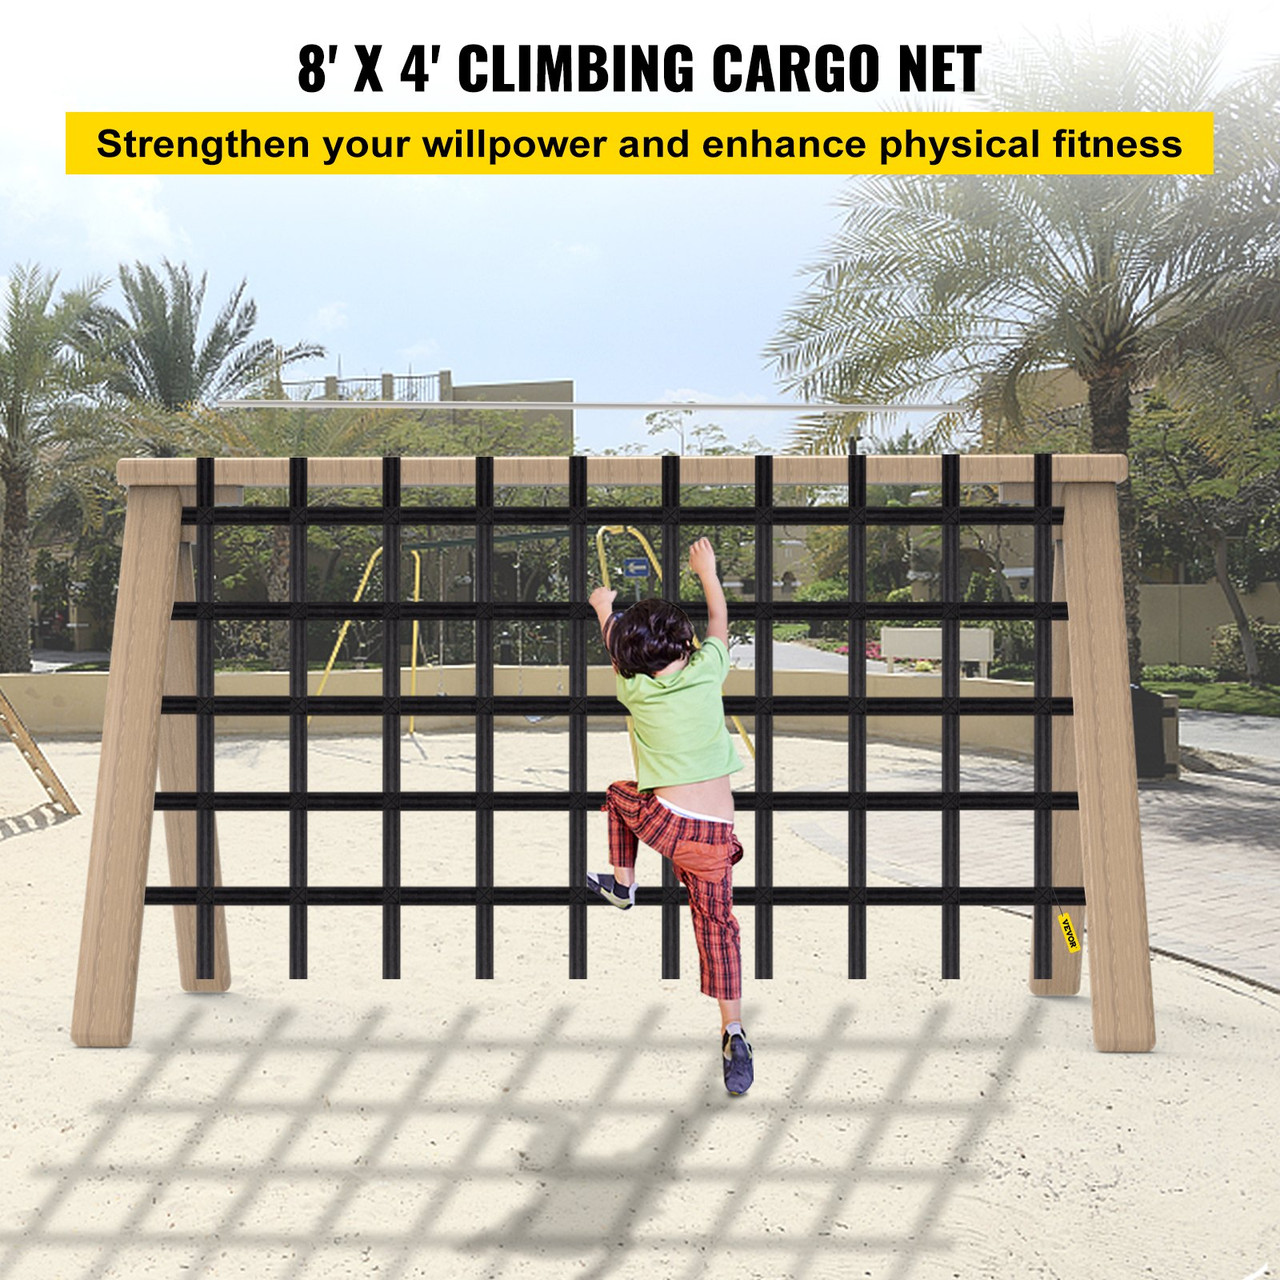 Climbing Cargo Net, 8' x 4' Playground Climbing Net, Polyester Material, Rope Ladder, Swingset, Large Military Climbing Cargo Net for Kids & Adult,